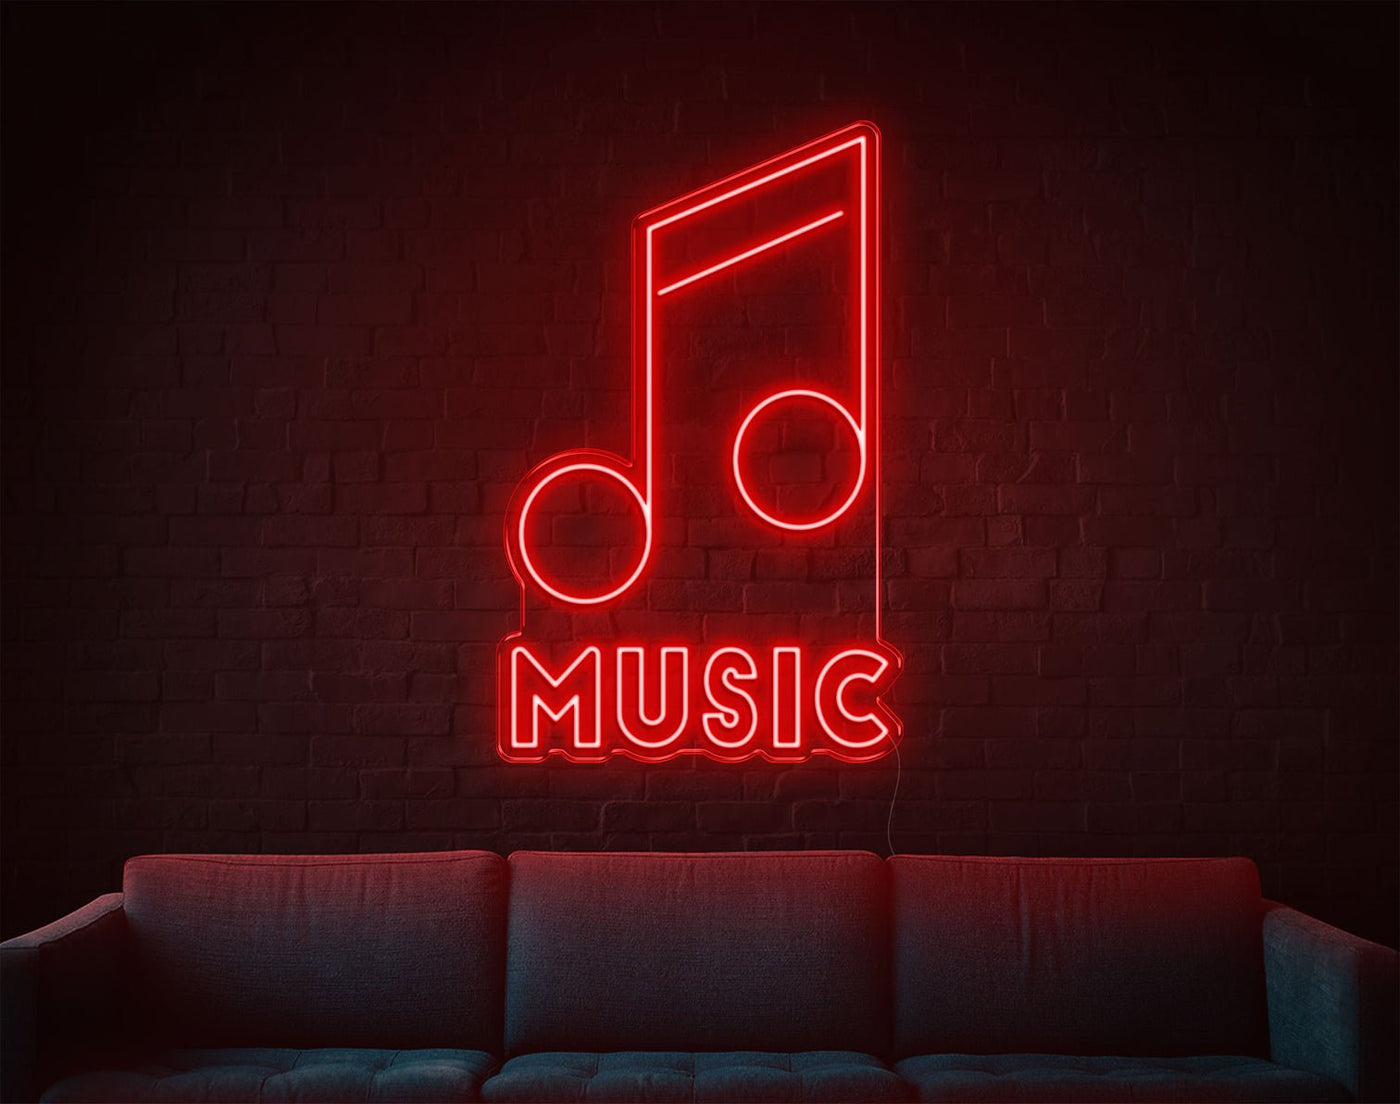 Music V1 LED Neon Sign - 14inch x 9inchHot Pink